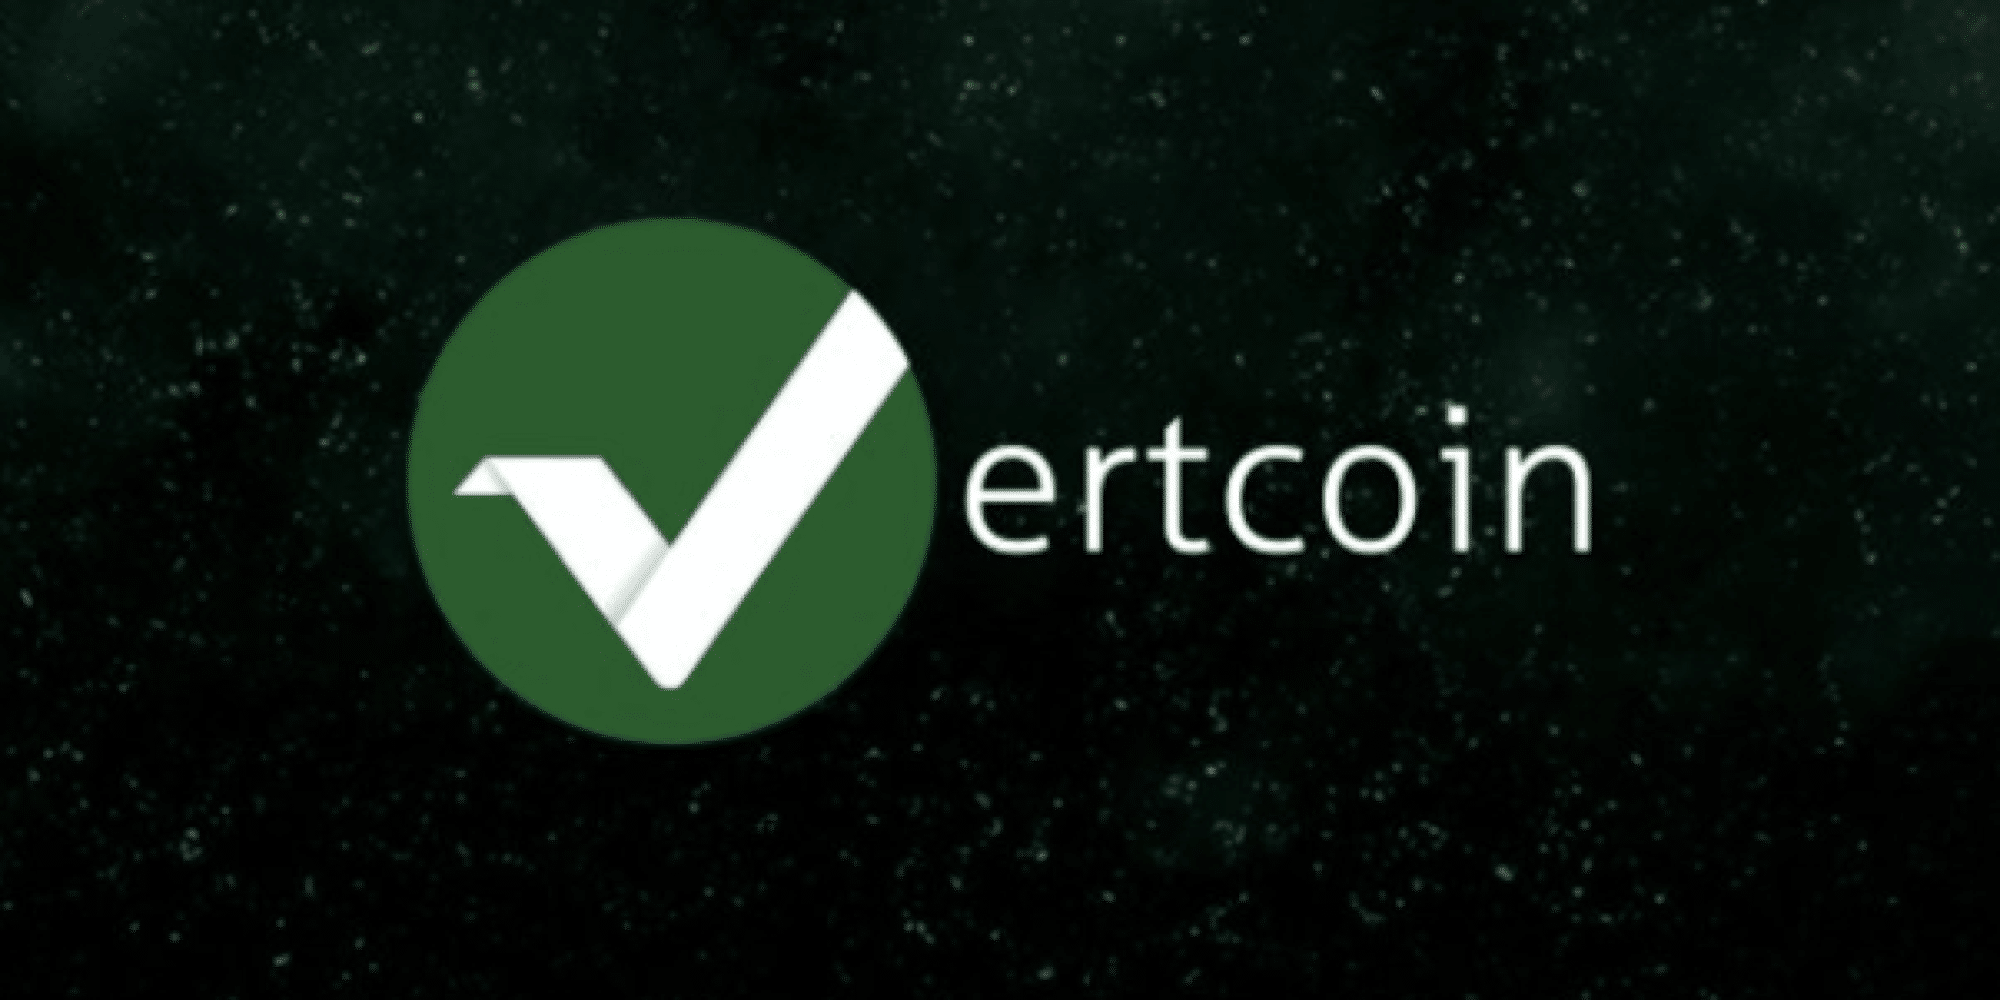 Vertcoin: A Beginner's Guide to this Innovative Cryptocurrency